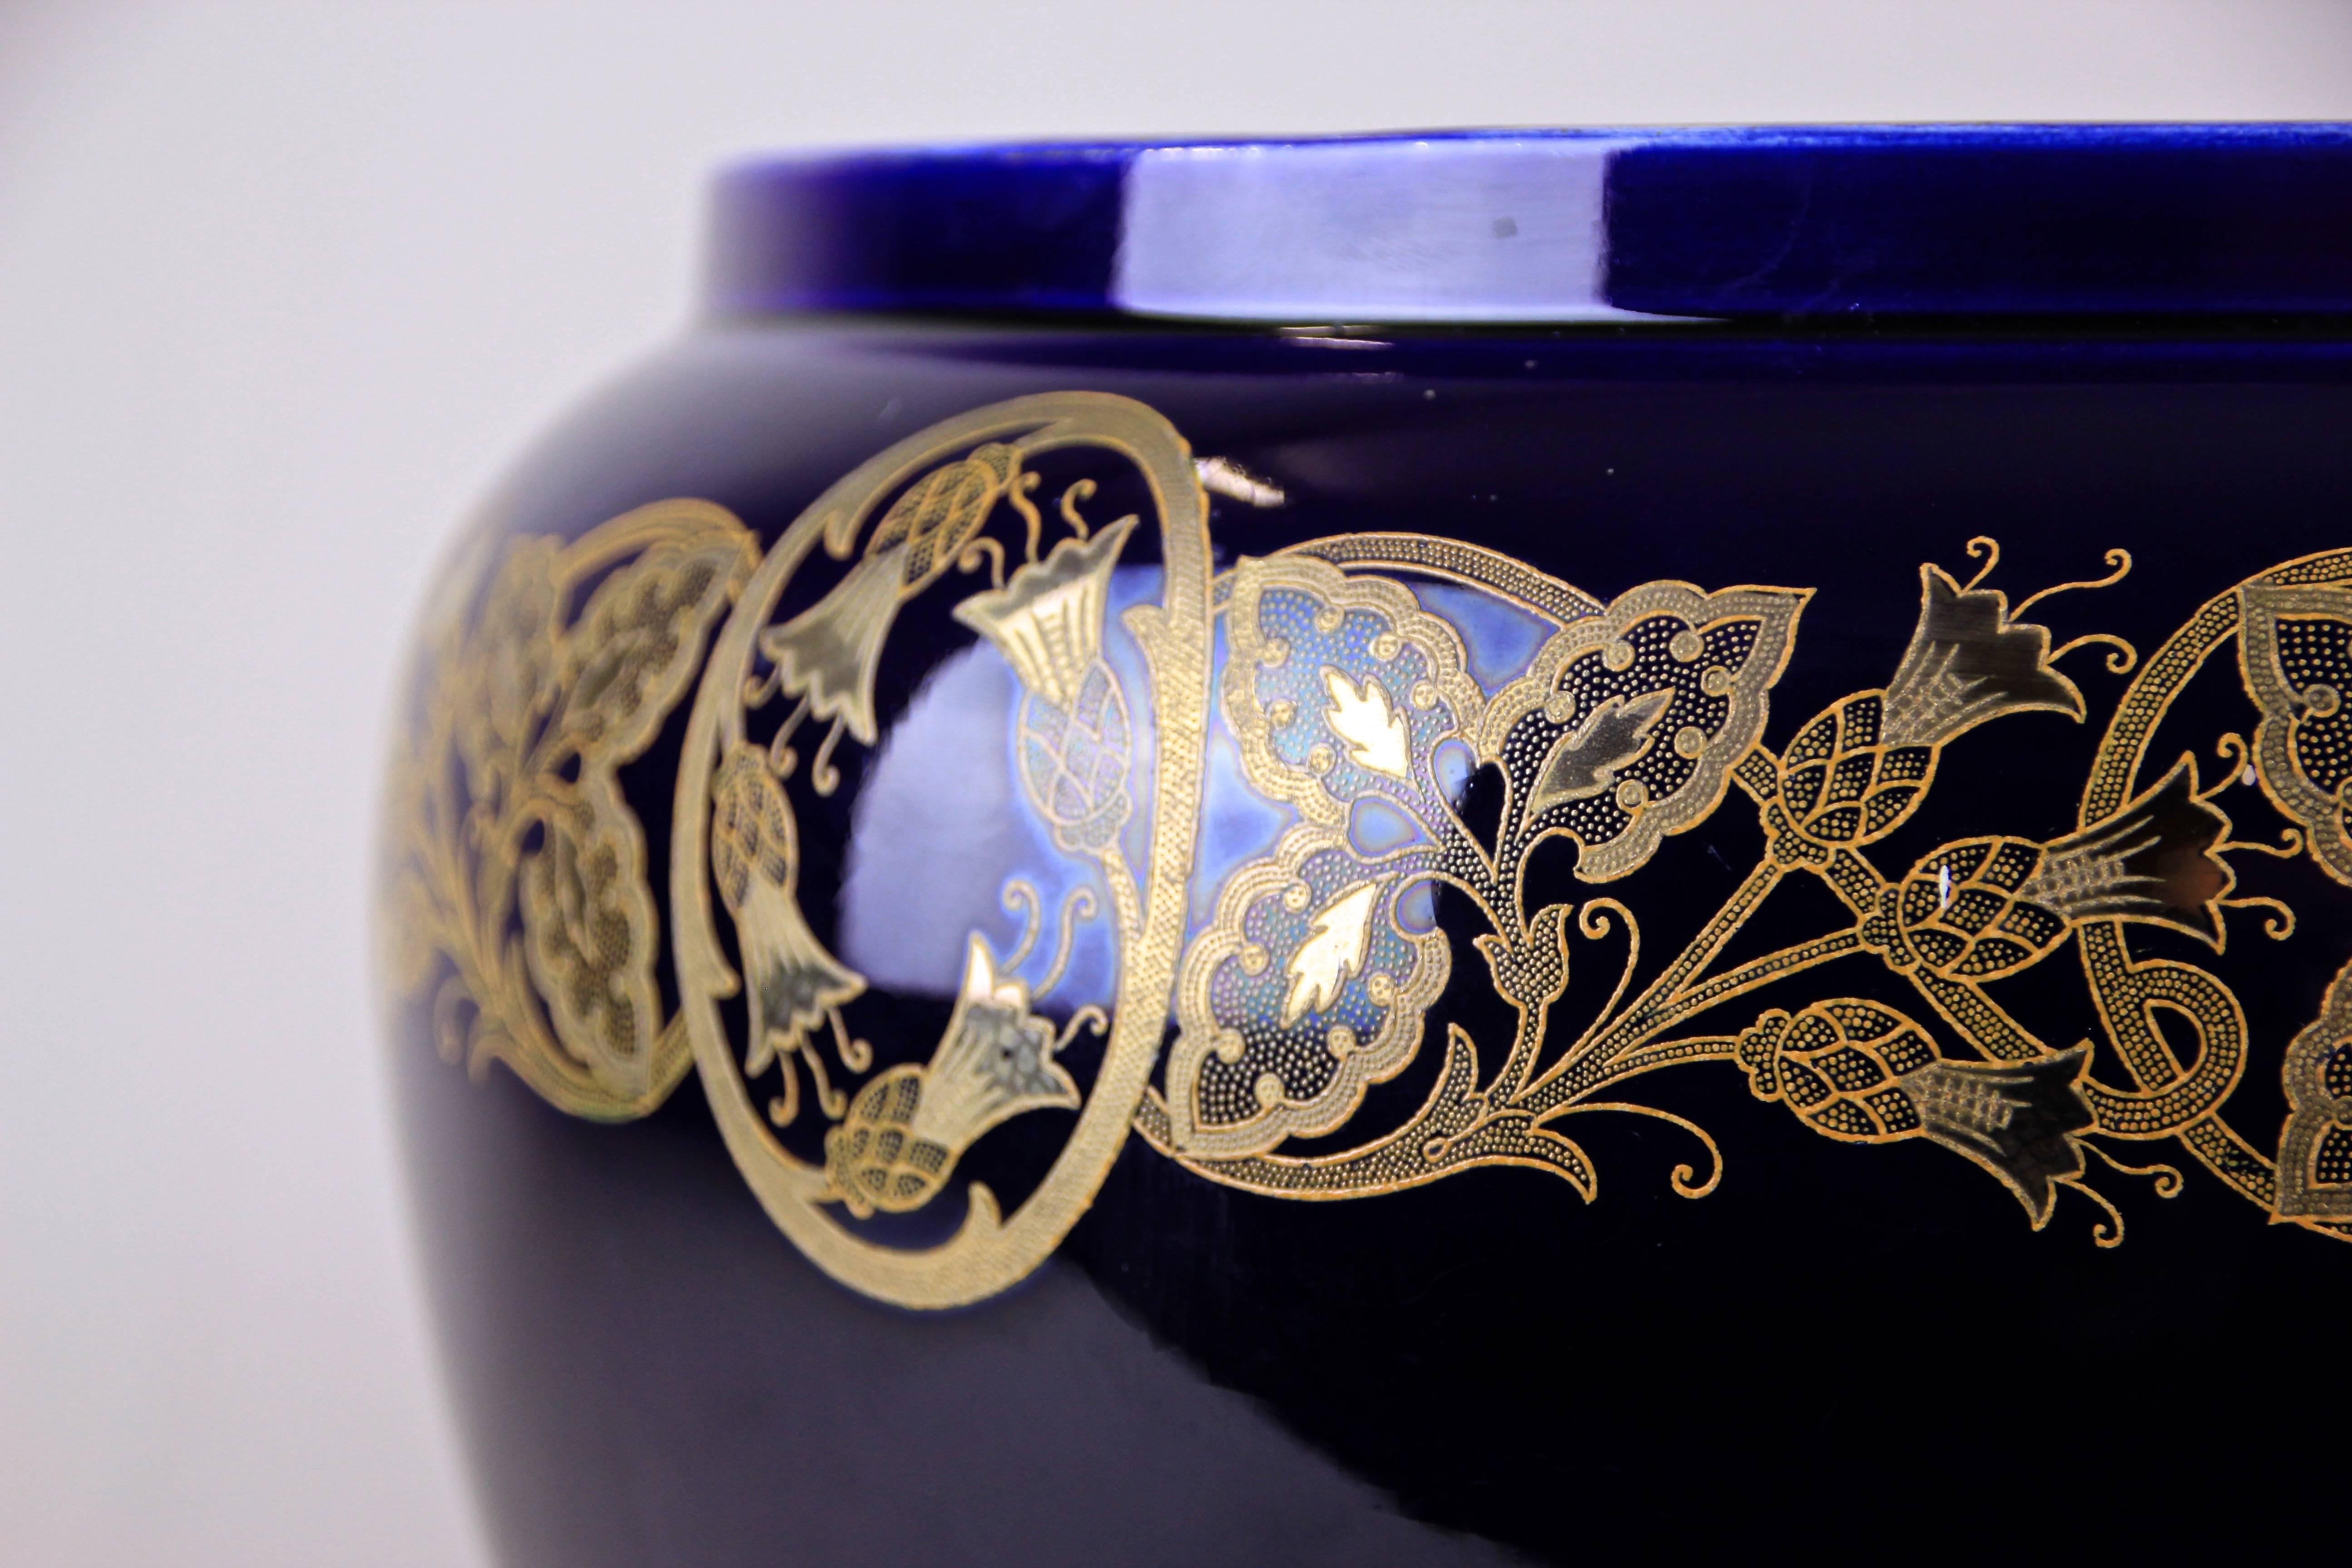 Very decorative Art Nouveau cachepot by Sarreguemines France, circa 1915. The marvellous floral design shows beautiful tendrils and flowers hand-painted with gold color. In combination with the dark cobalt blue color a lovely contrast.
On the